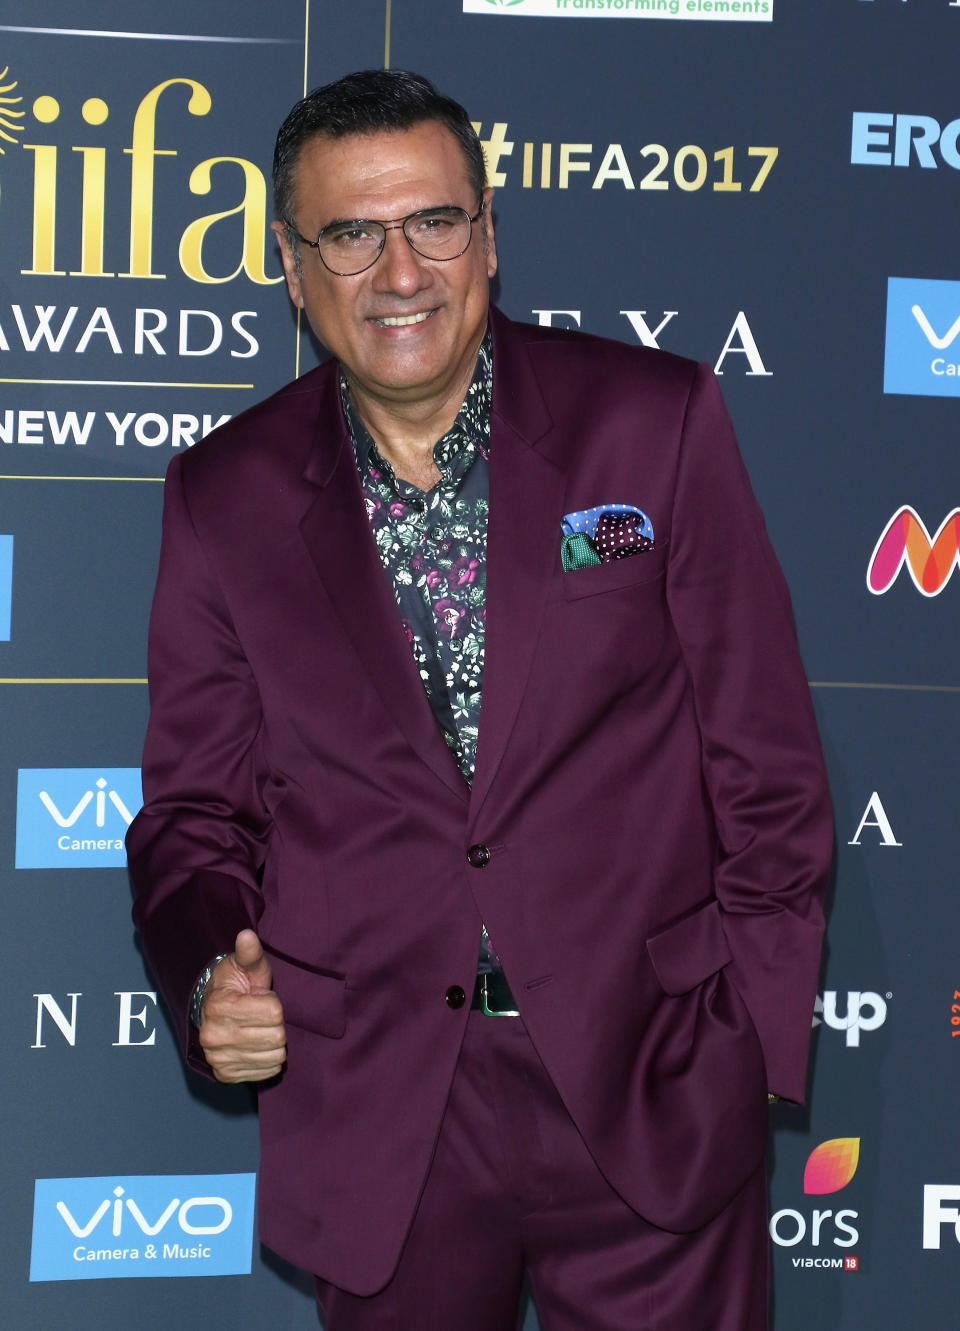 EAST RUTHERFORD, NJ - JULY 14: Actor Boman Irani attends the 2017 International Indian Film Academy Festival at MetLife Stadium on July 14, 2017 in East Rutherford, New Jersey.  (Photo by Jim Spellman/Getty Images)